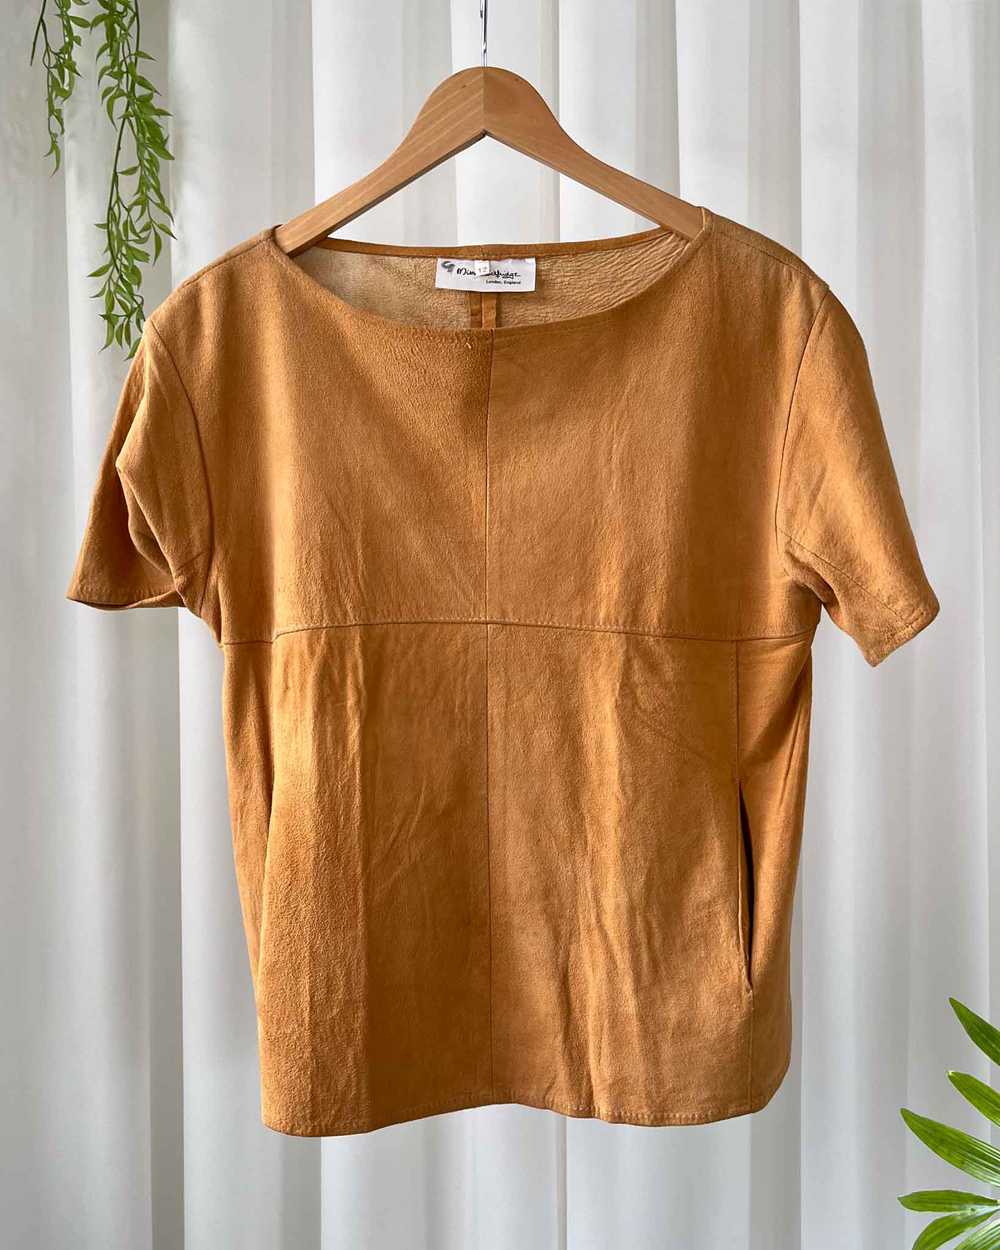 90s Soft Suede Leather Top - image 2